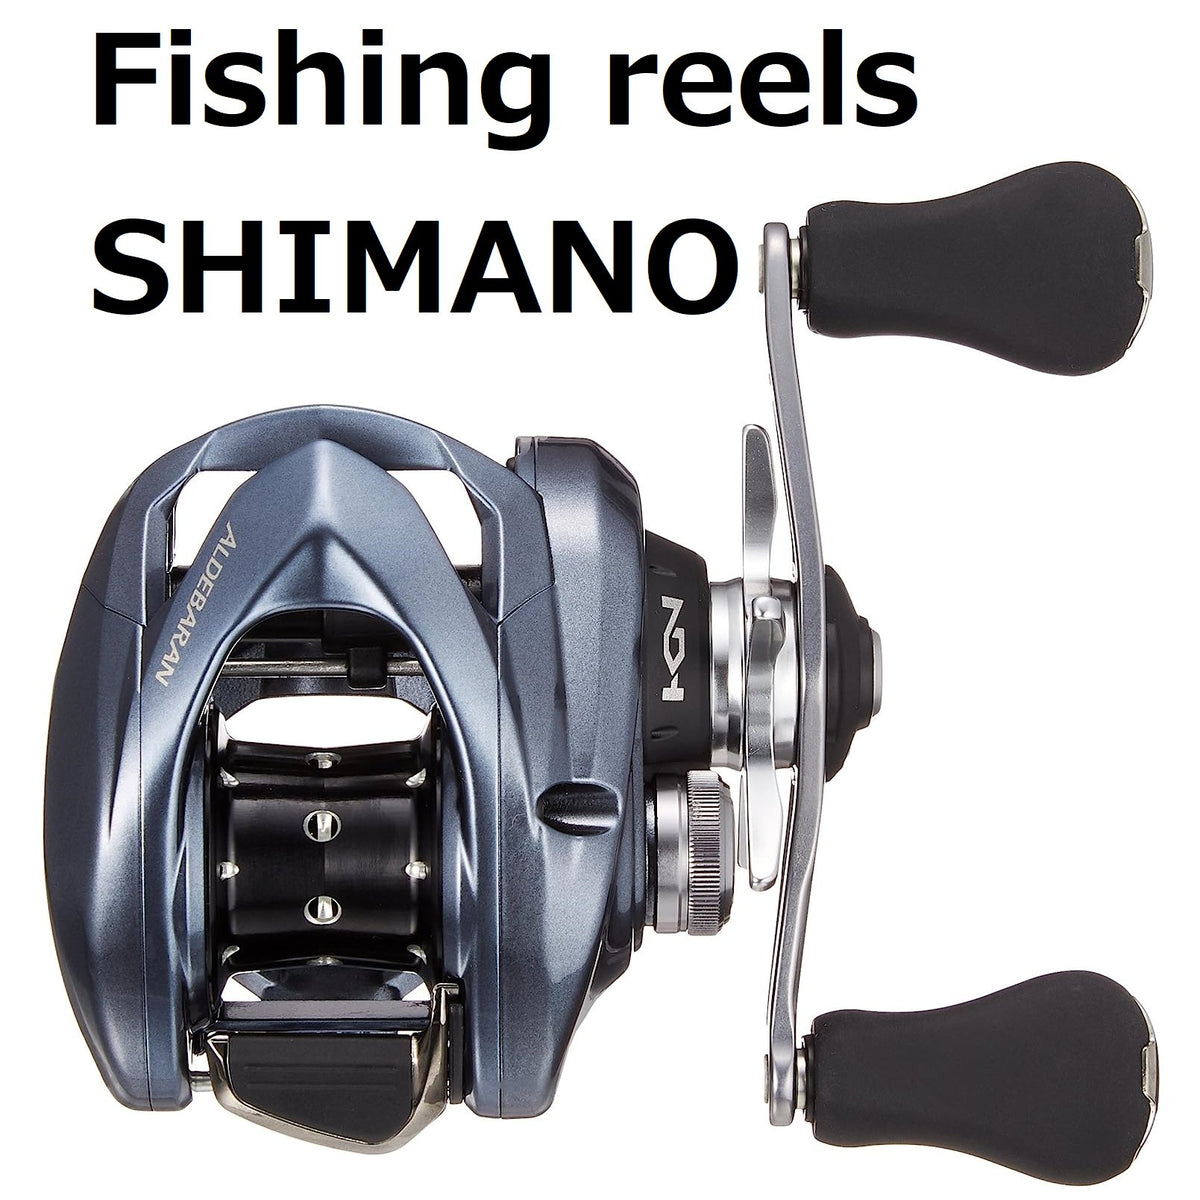 Shimano – EX TOOLS JAPAN, High quality tools from Japan